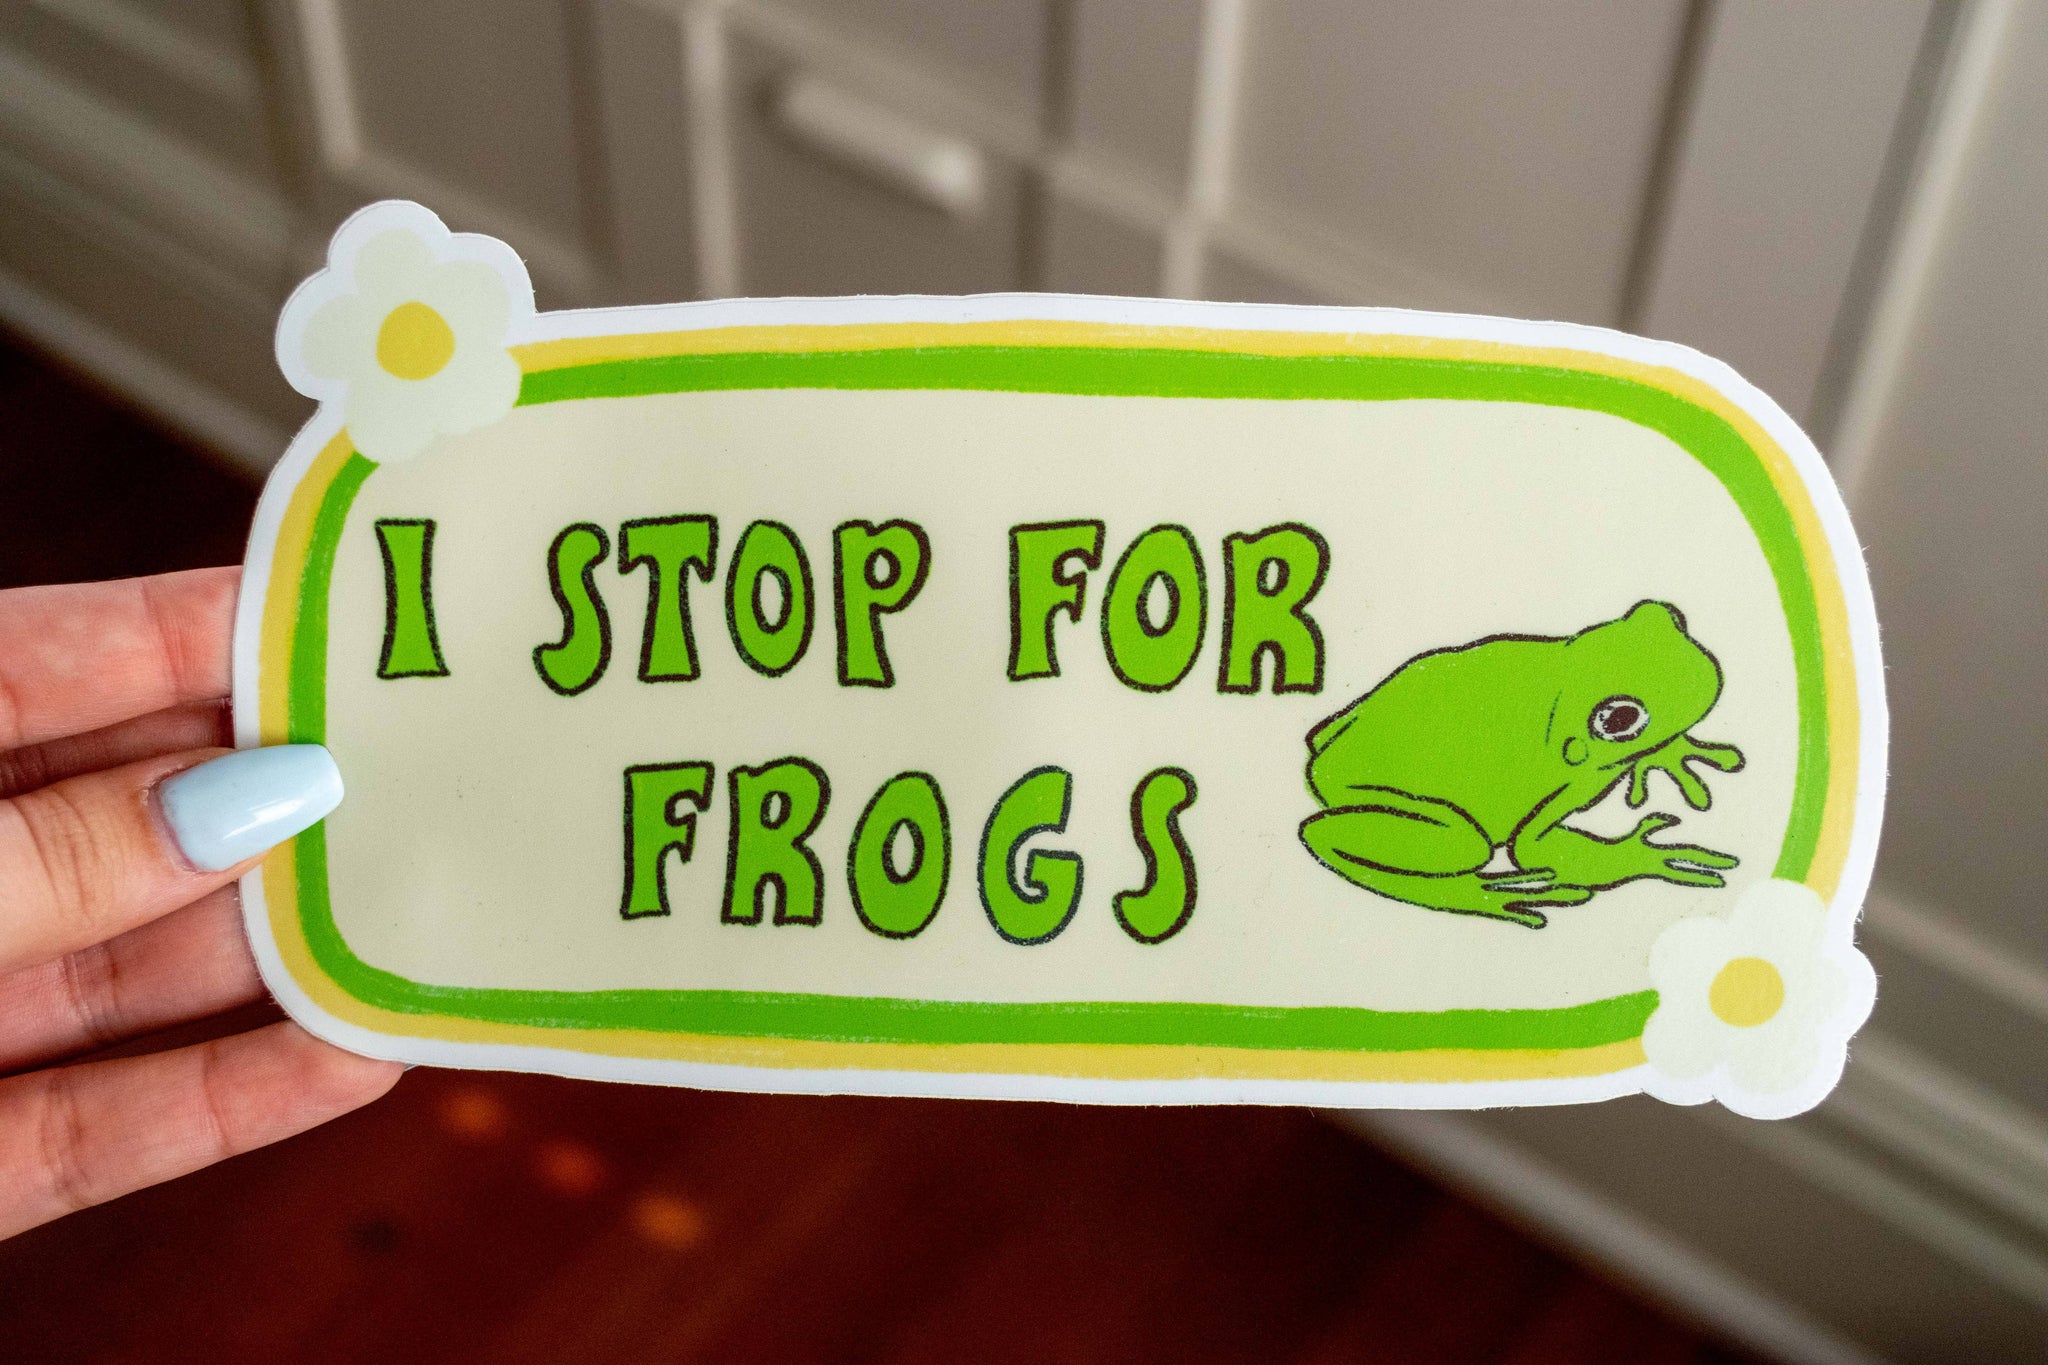 I Stop For Frogs Bumper Sticker